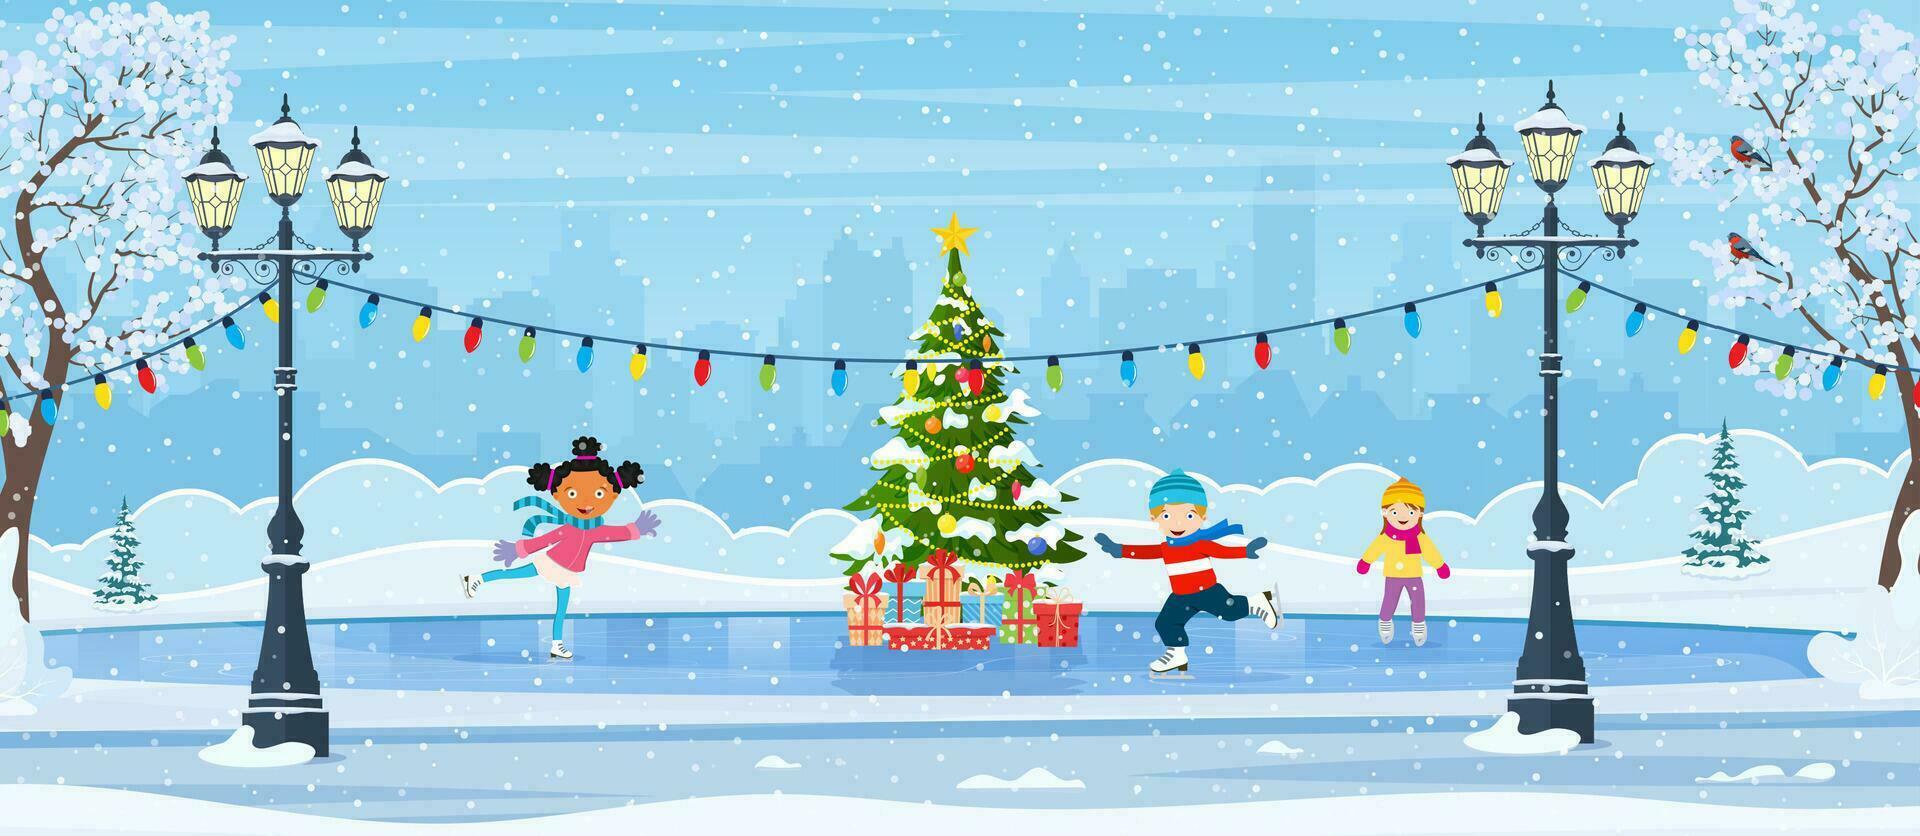 Christmas ice rink with fir tree decorated with illumination. Winter scene with skating children. cartoon frozen landscape. Winter day park scene. Vector illustration in flat style